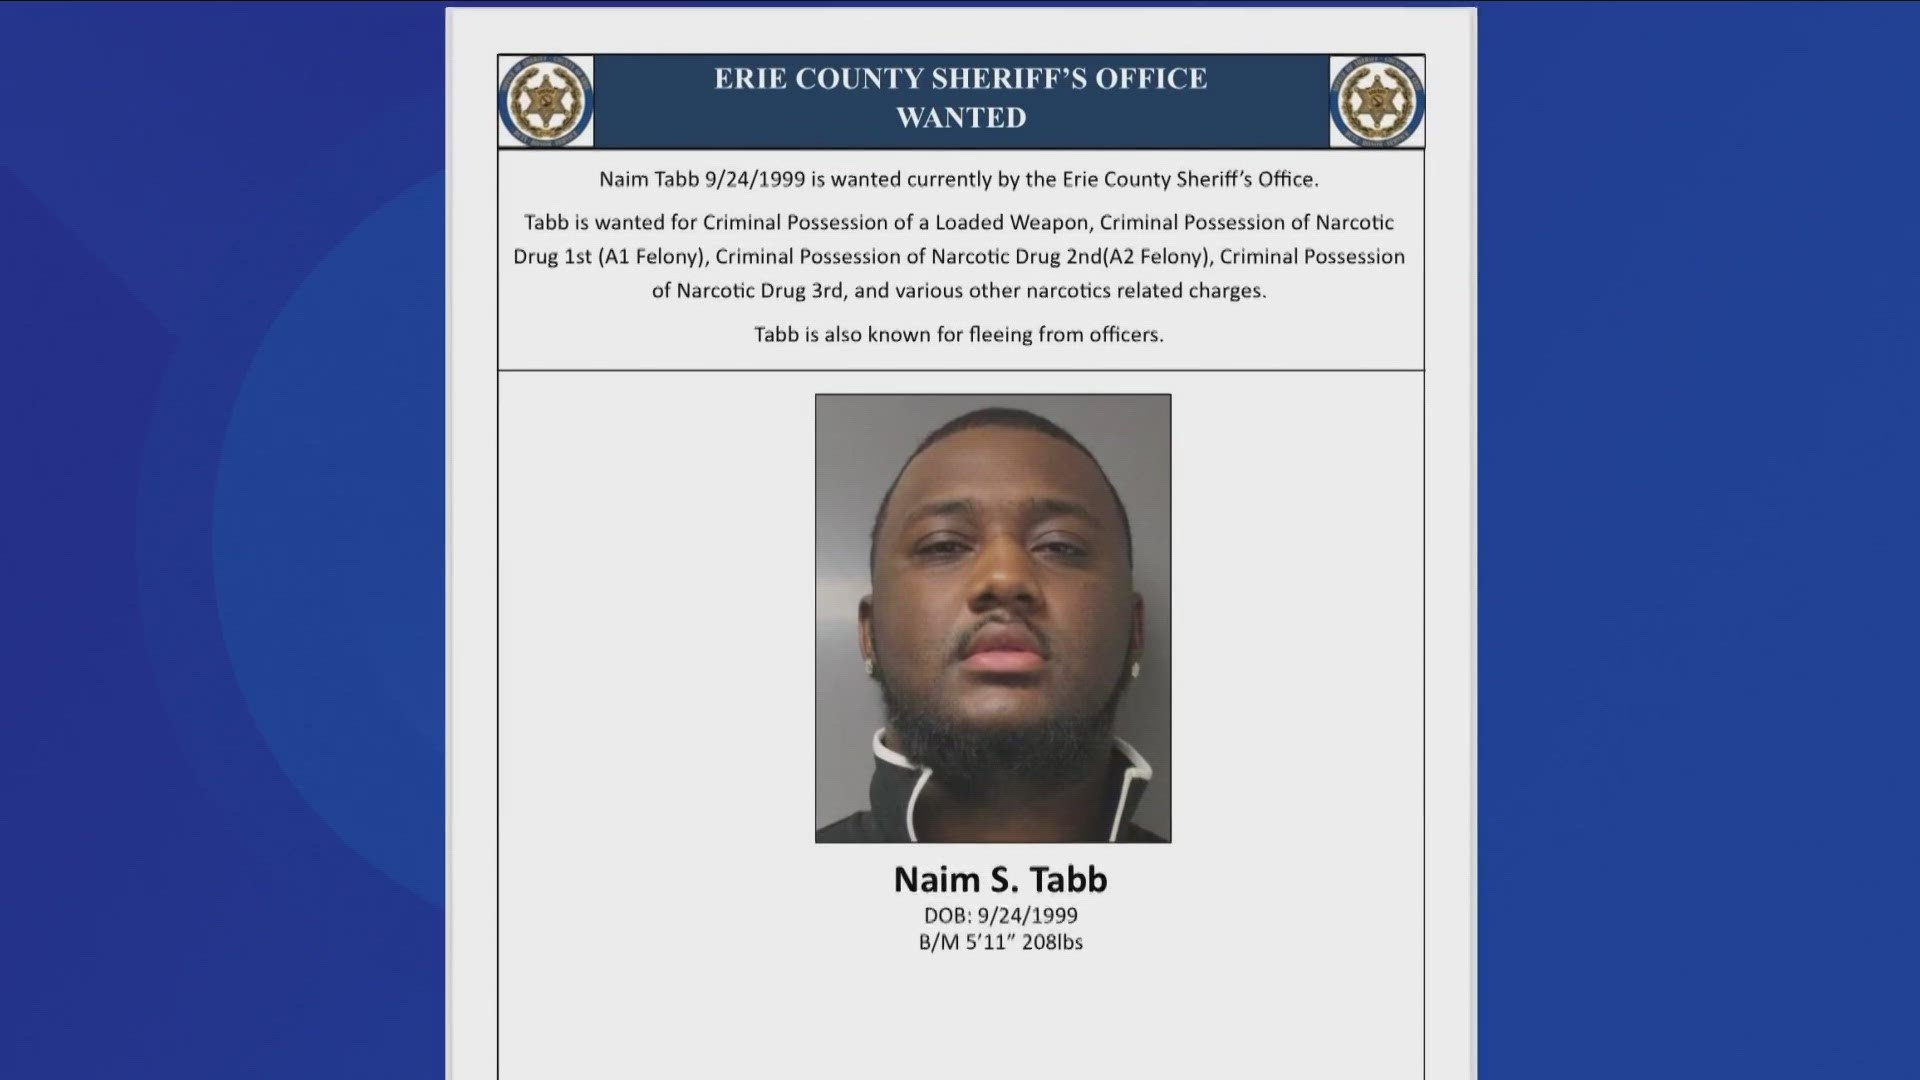 Police asked for the public's help in locating Naim Tabb, who they say fled officers trying to apprehend him earlier this week.